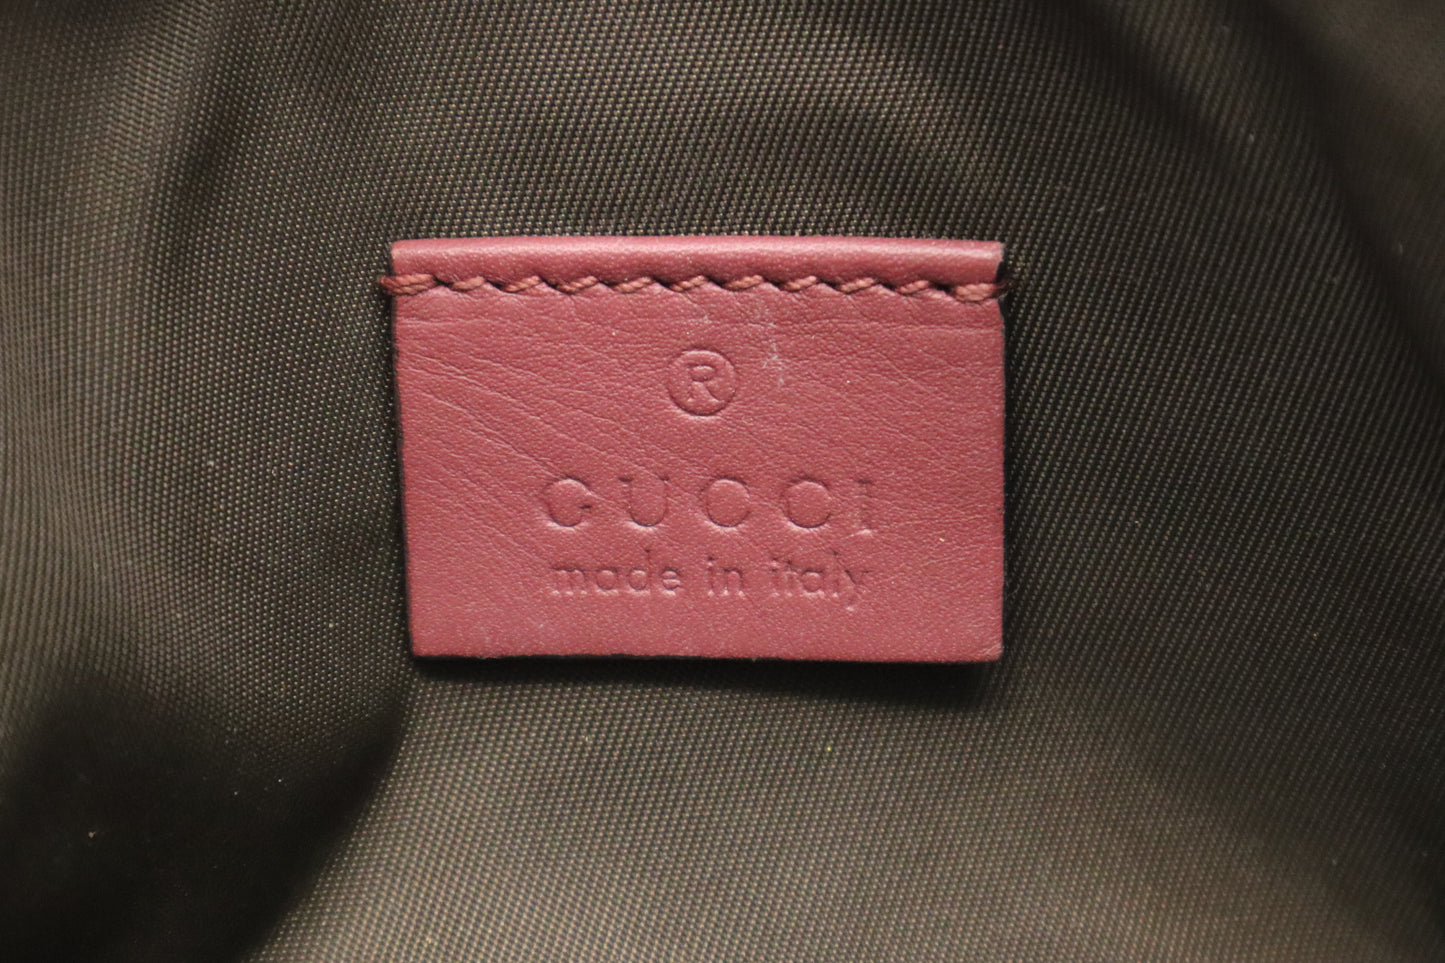 Gucci Pouch in Pink Blooms GG Canvas